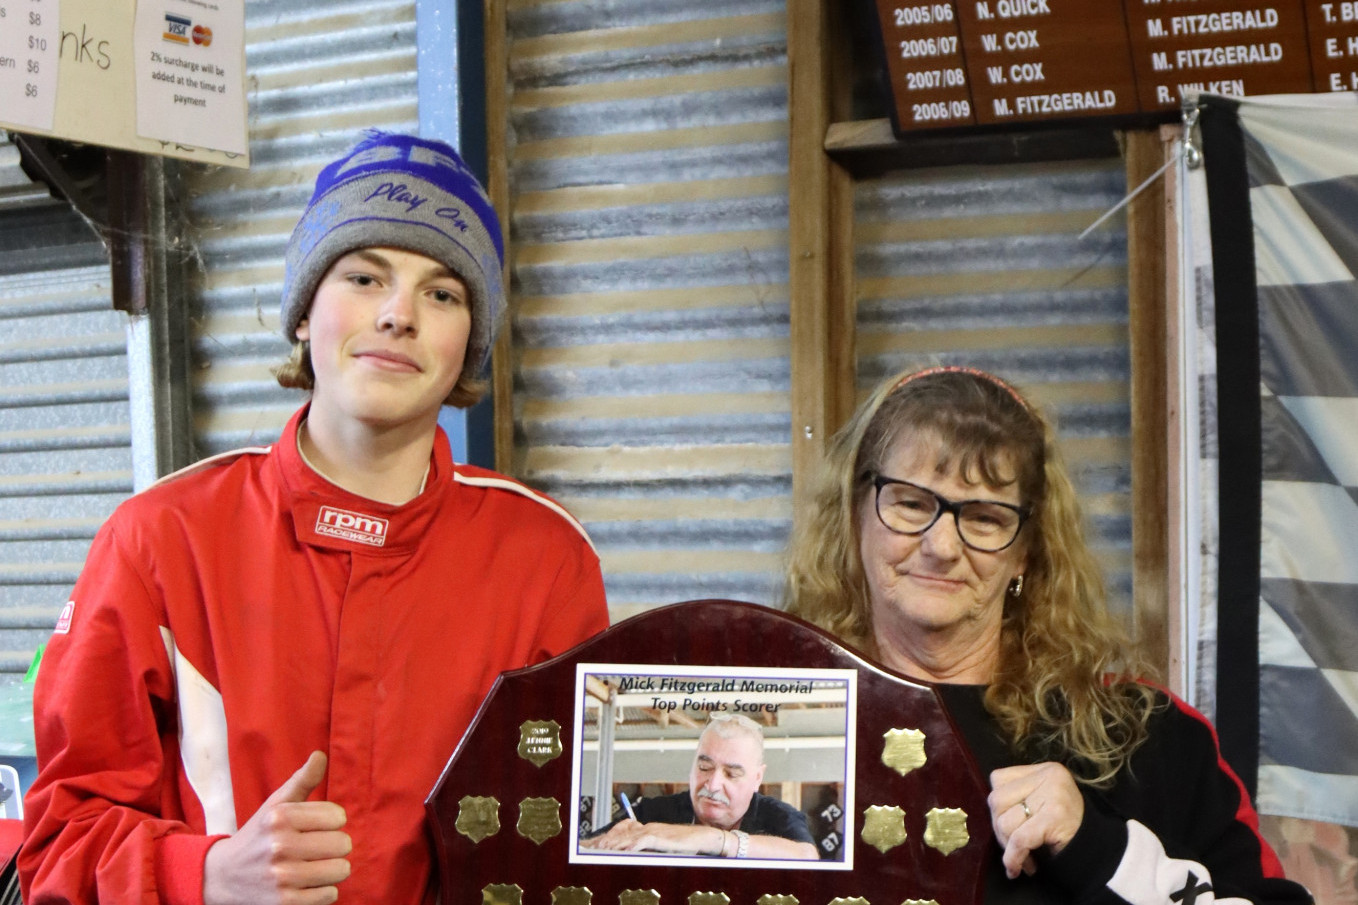 Jack Mills was the top pointscorer and winner of the Mick Fitzgerald Trophy. He raced in the 1200 junior sedan class. He received the trophy from Sue Fitzgerald. PHOTO: TANYA EASTWOOD